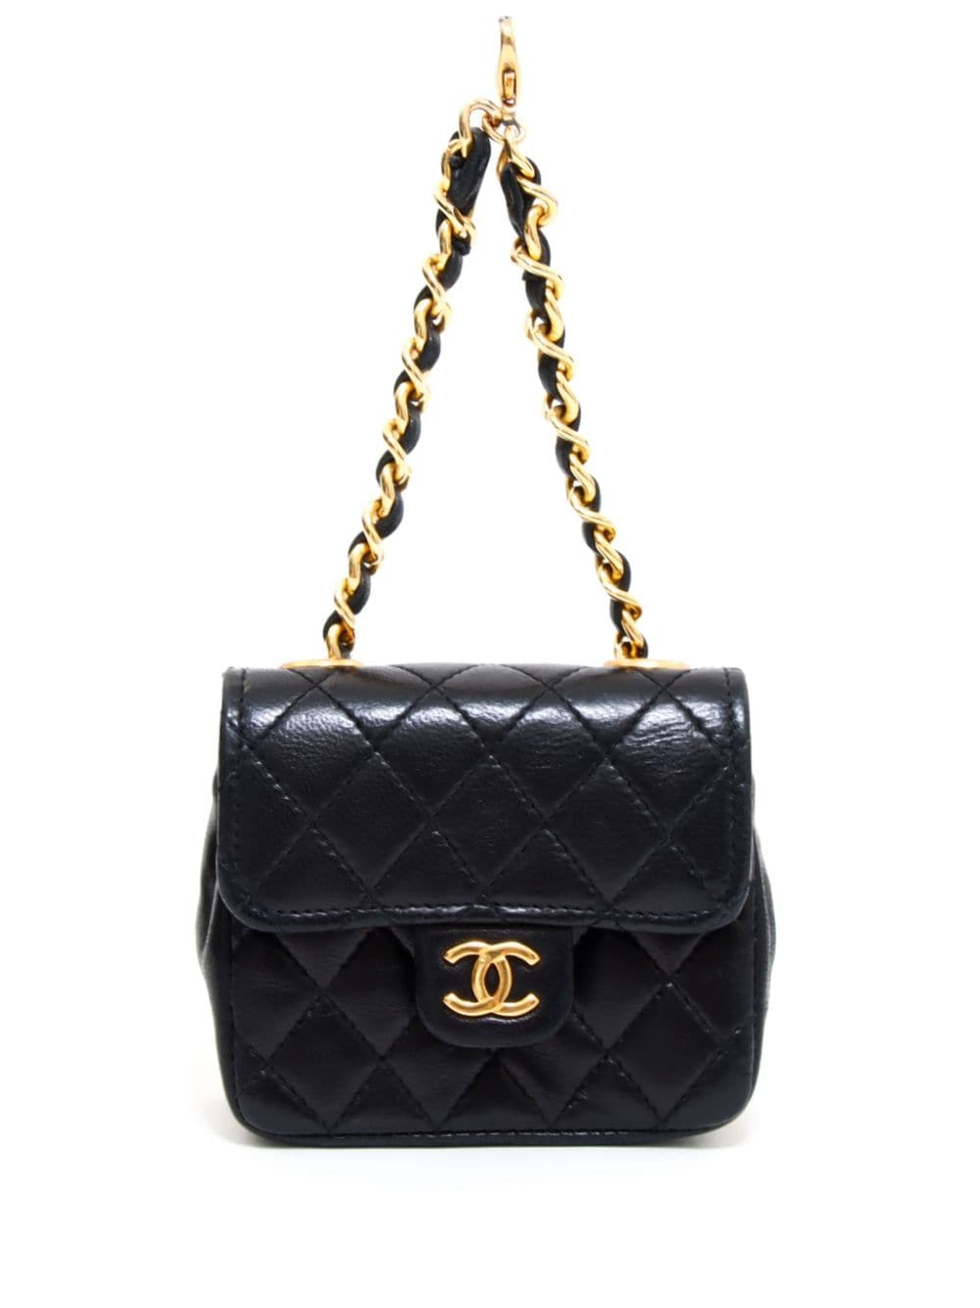 chanel bags black friday